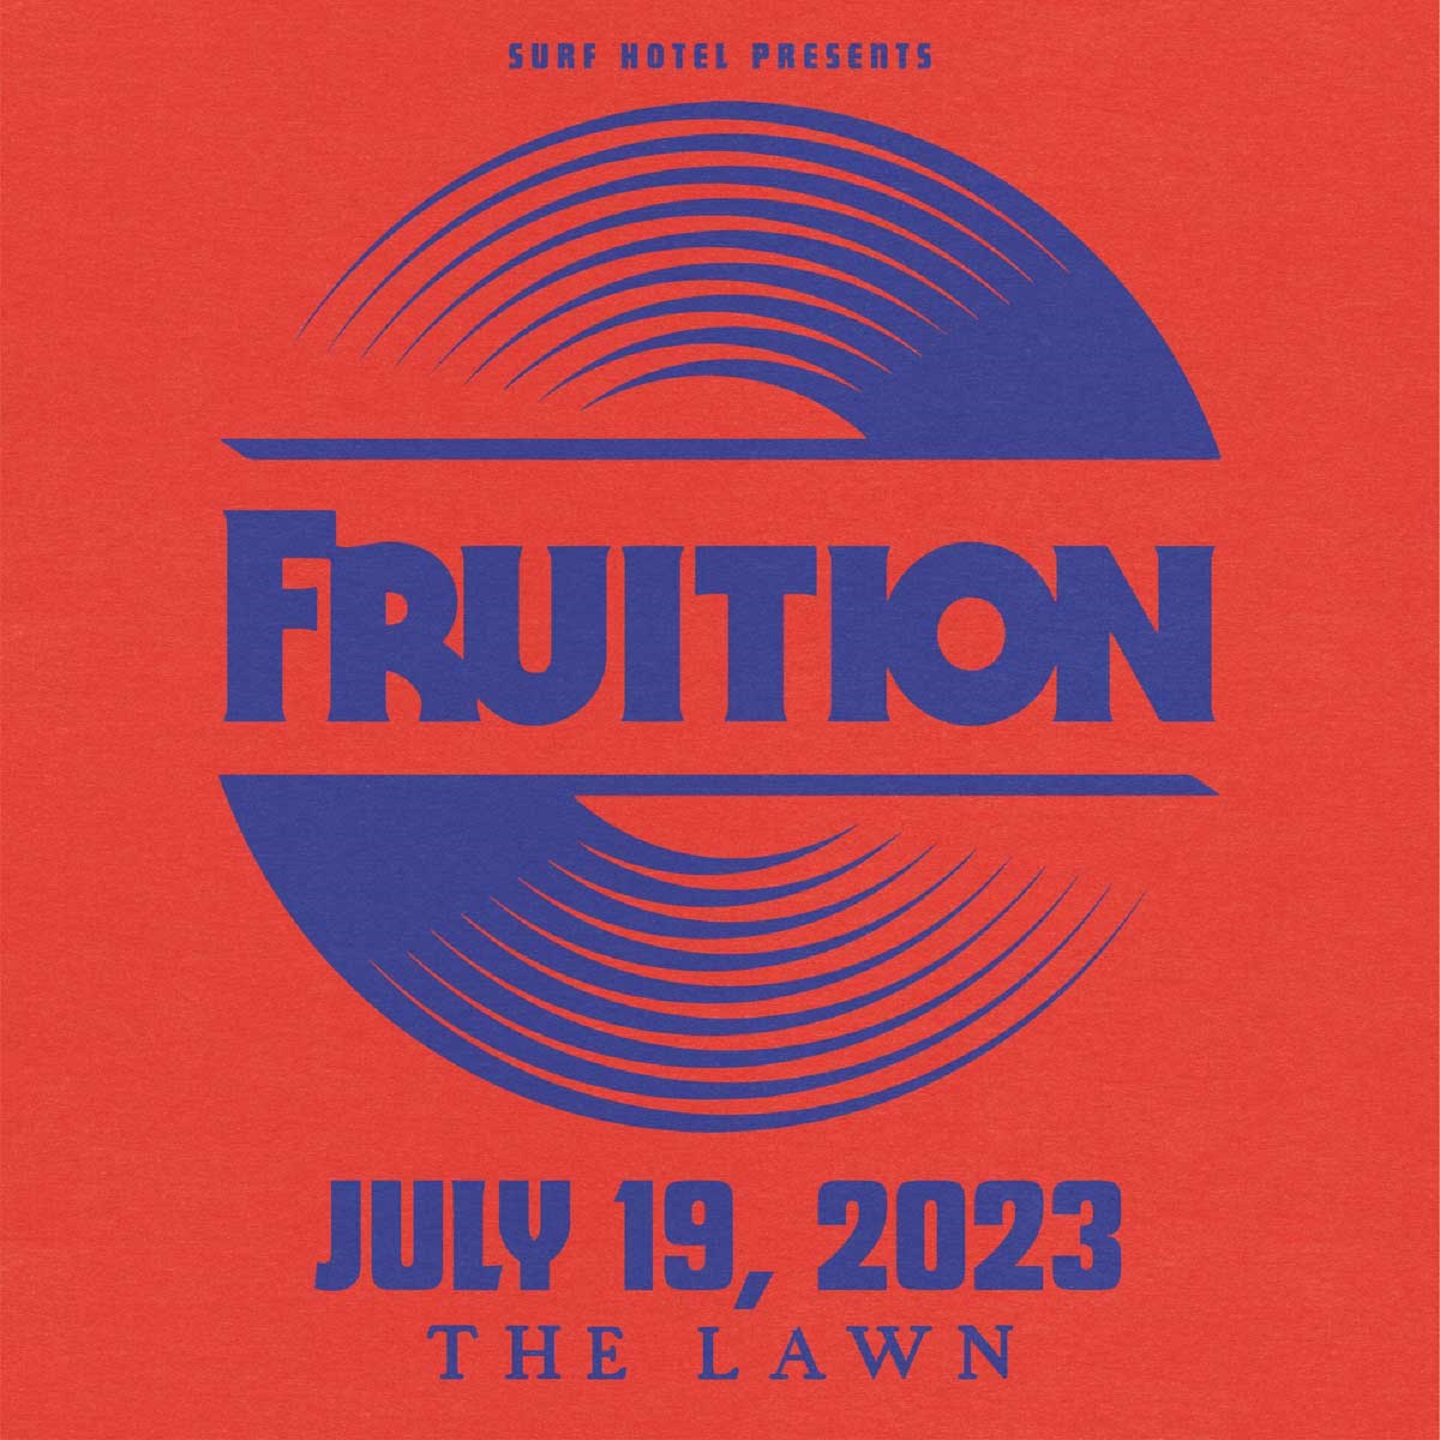 Fruition on The LAWN, at Surf Hotel in Buena Vista, Colorado